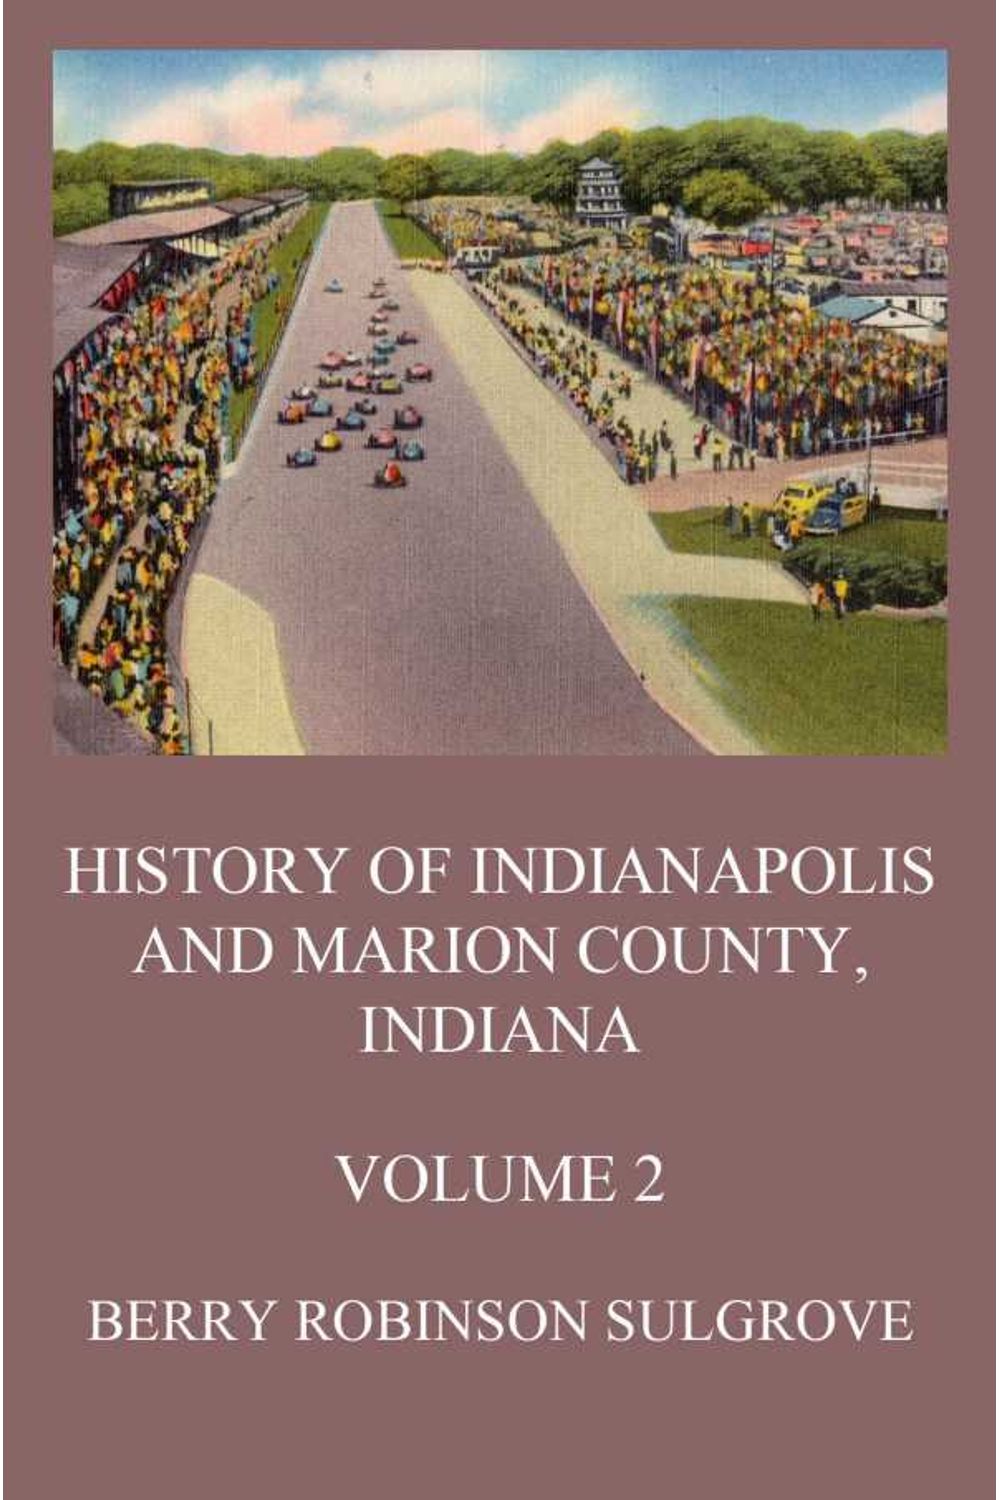 bw-history-of-indianapolis-and-marion-county-indiana-volume-2-jazzybee-verlag-9783849660512